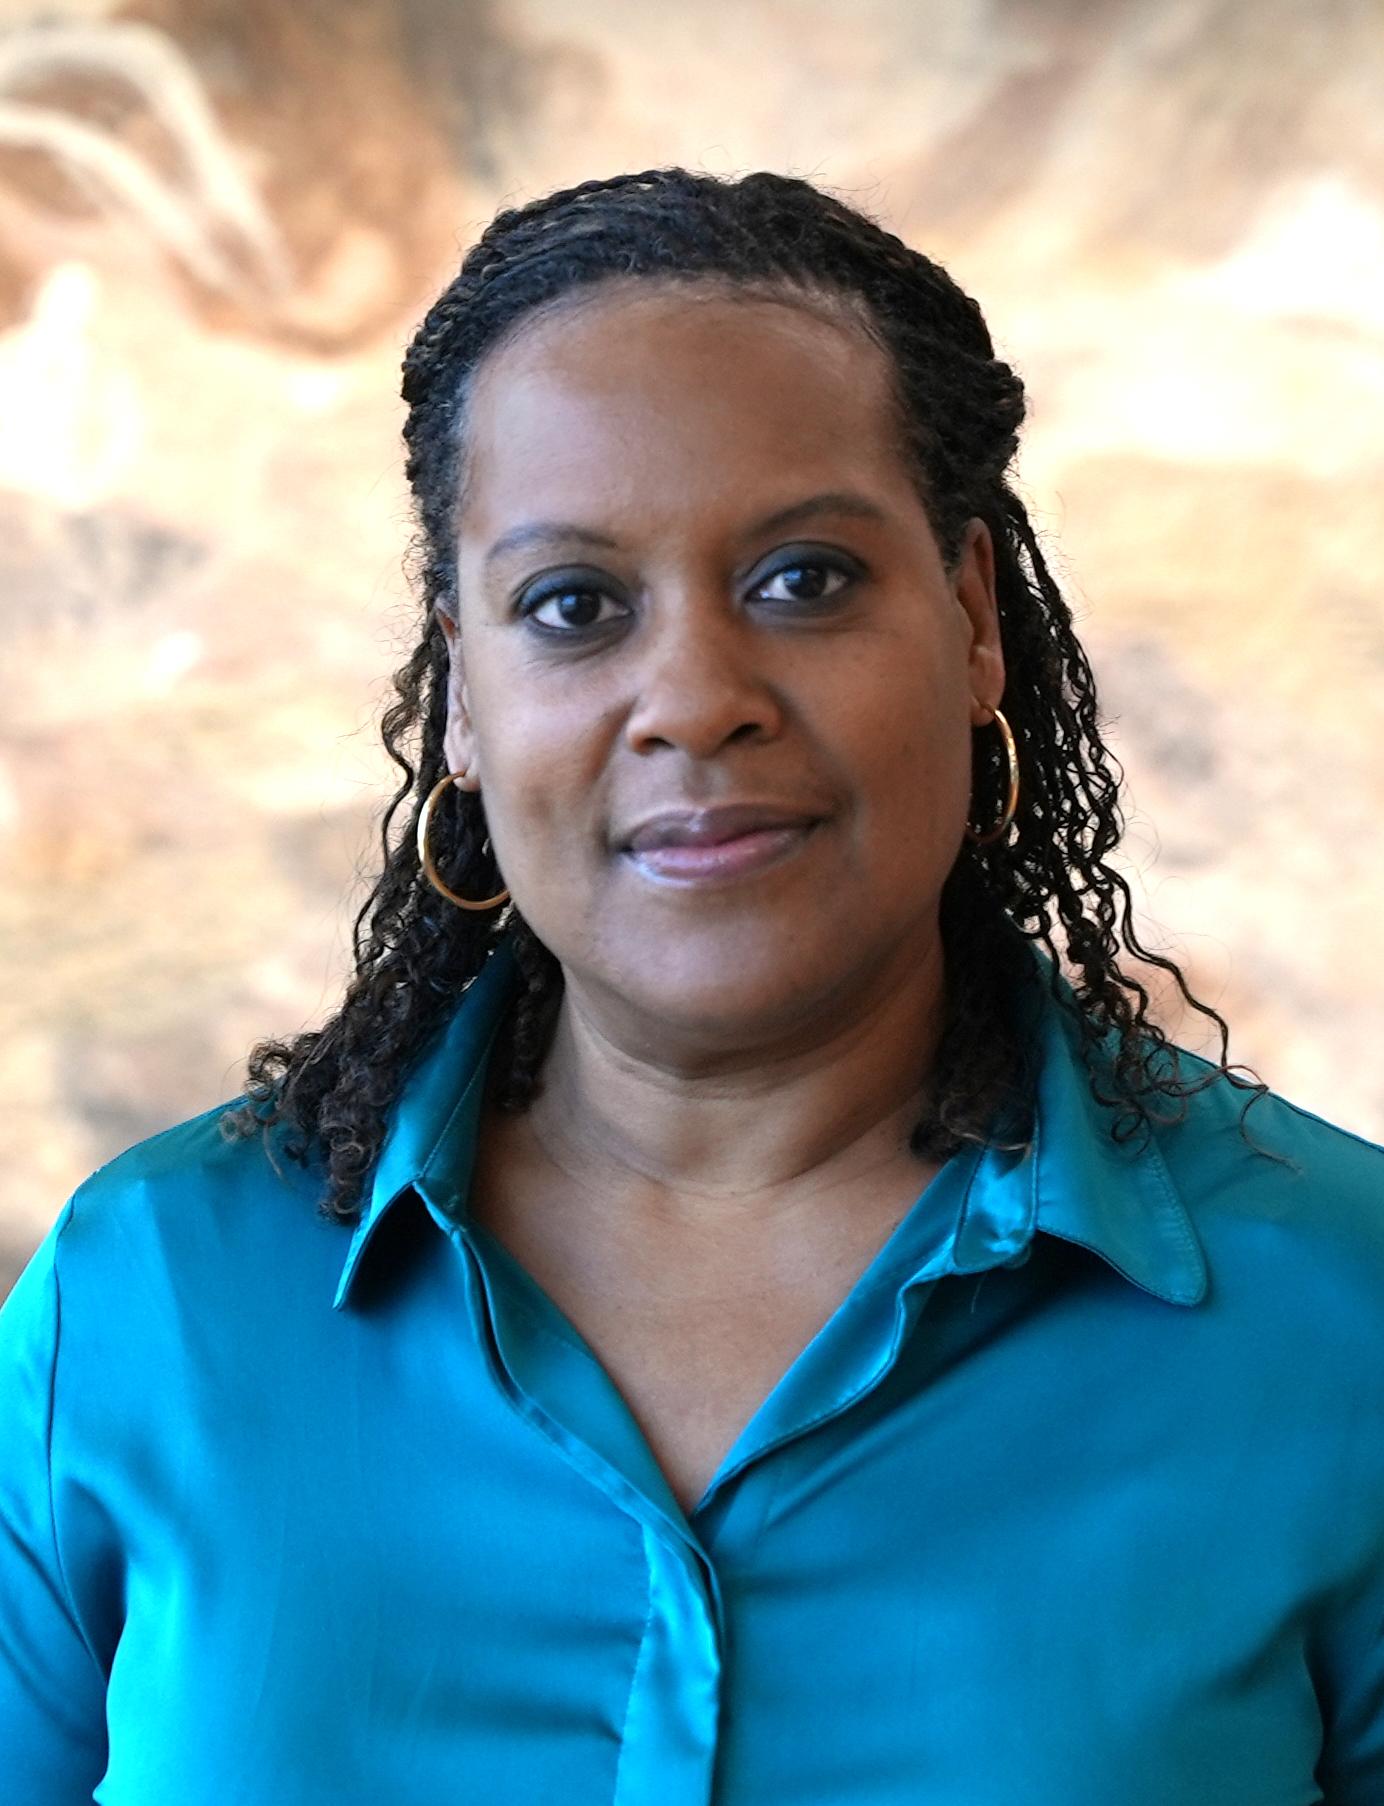 Robin V. Harris poses for a professional headshot, and wearing a teal blue button up and smiling without showing her teeth.